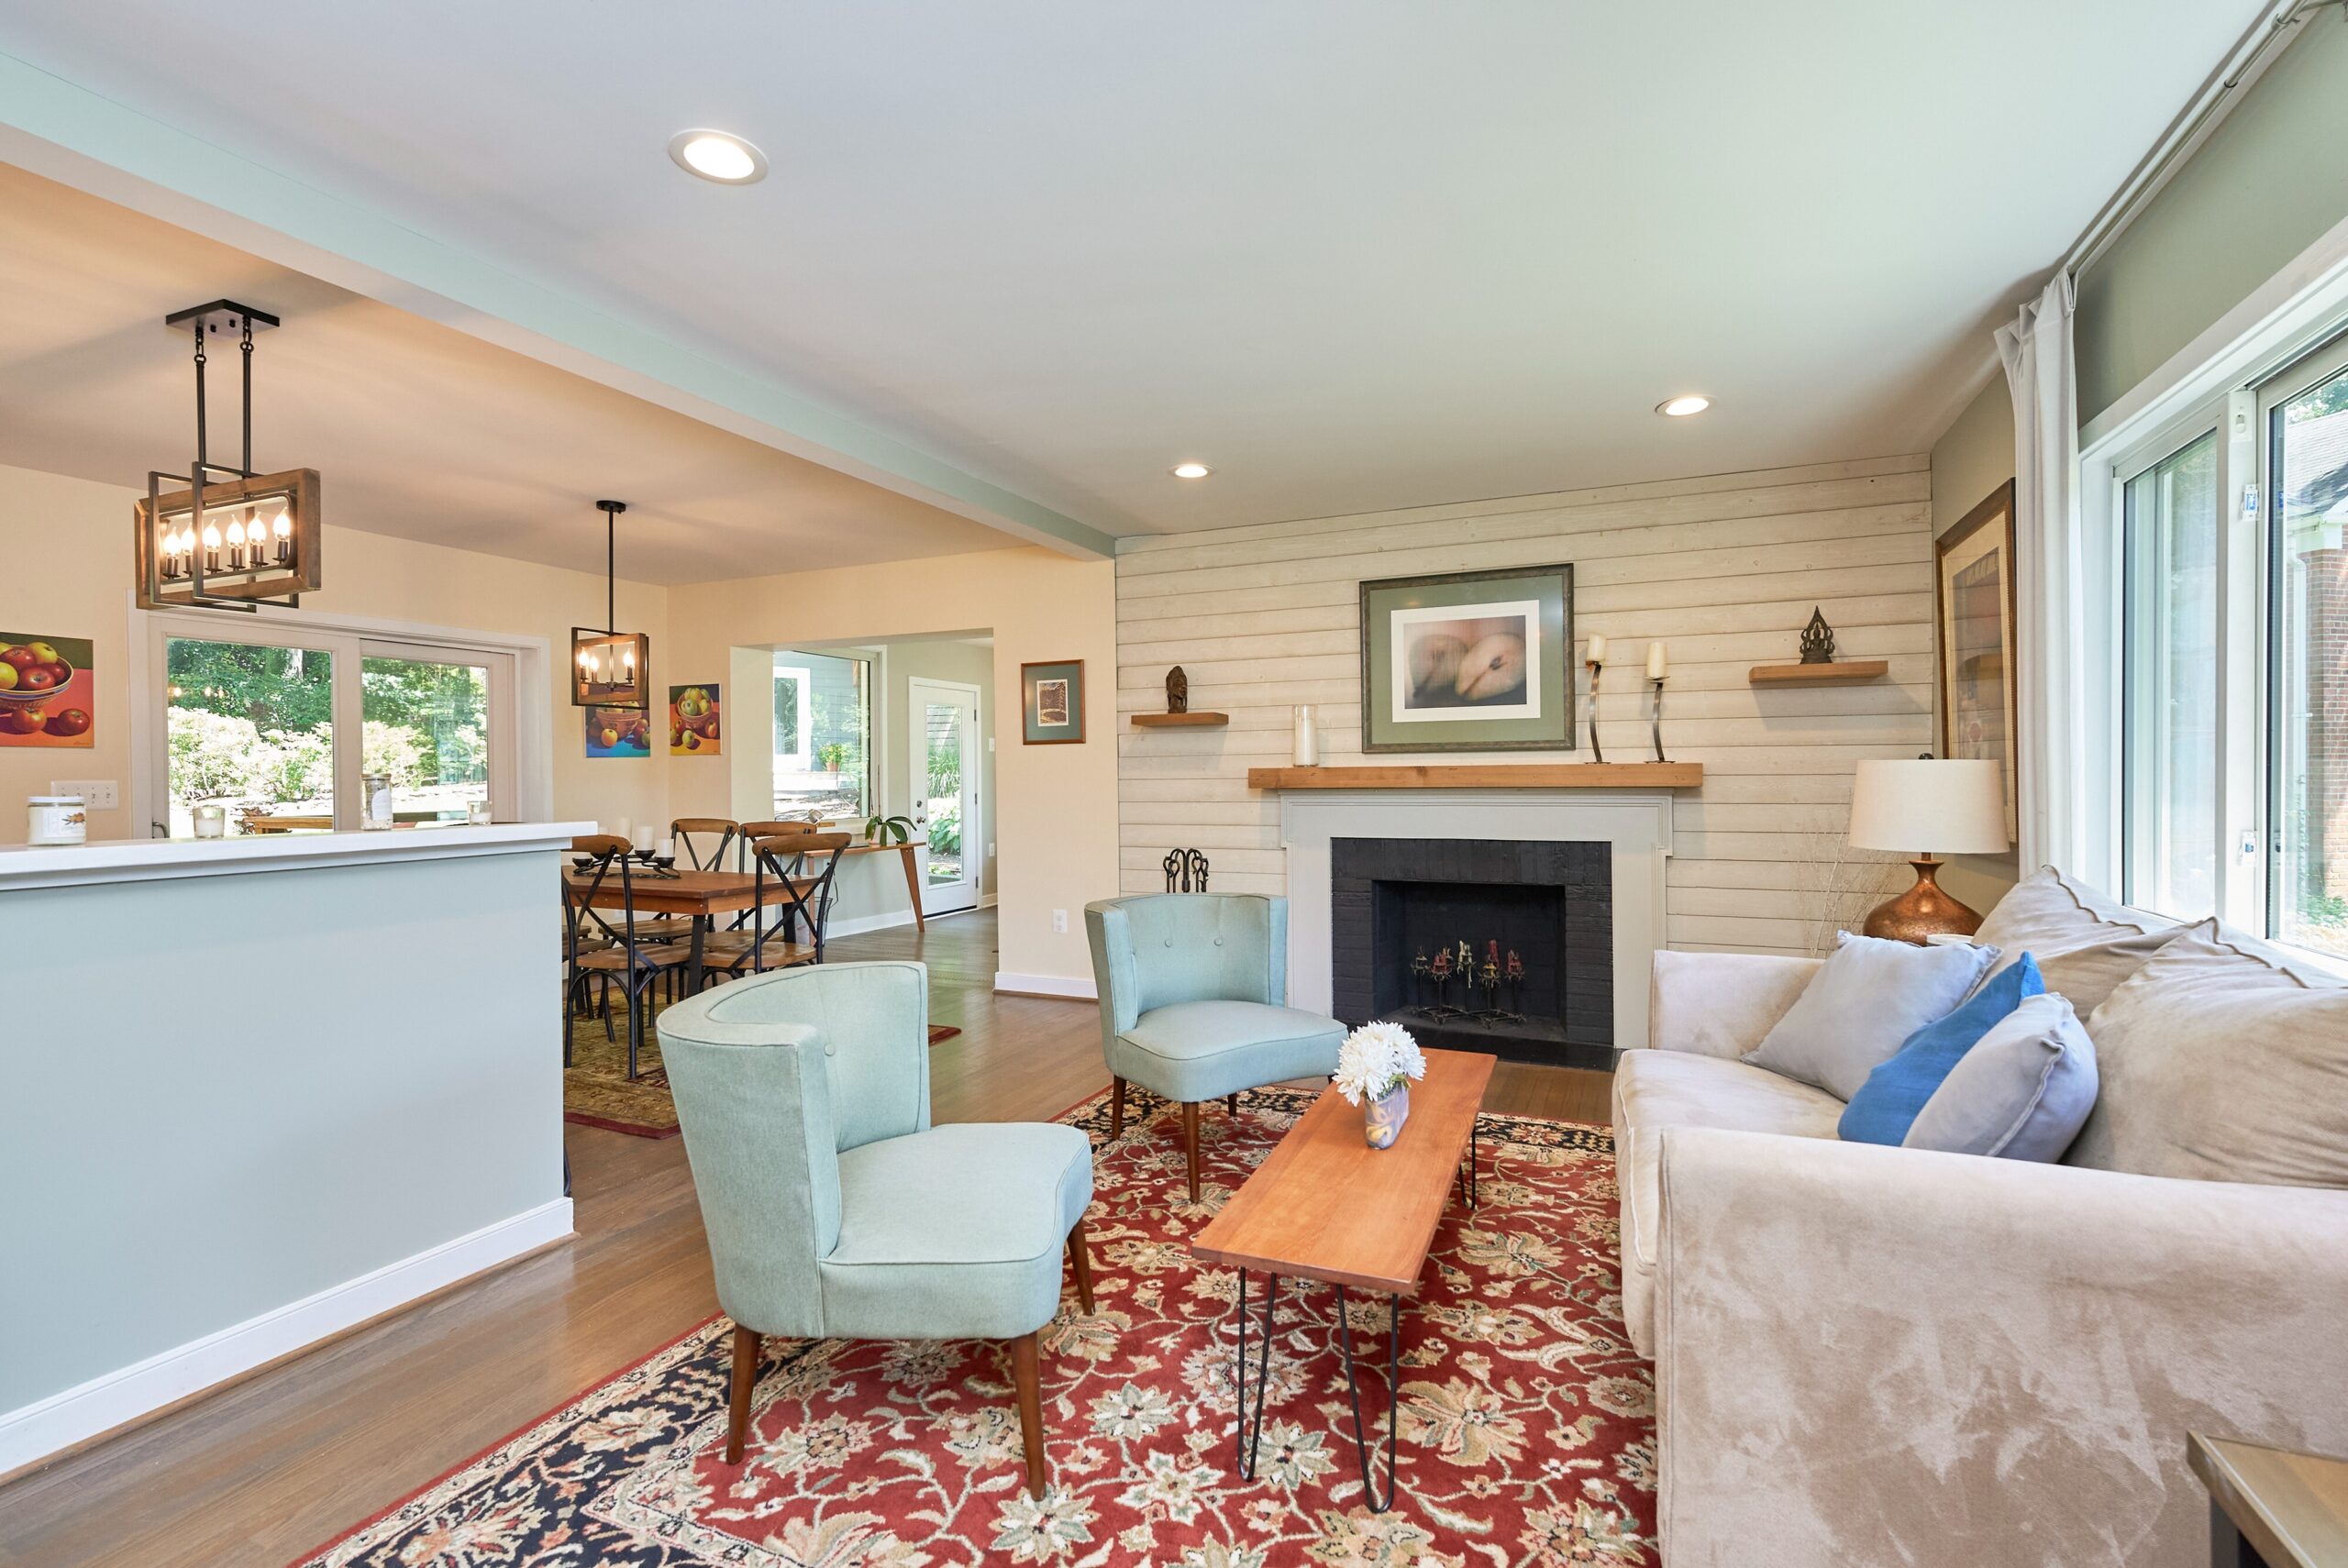 Professional photo of interior of custom home in Falls Church, Virginia. Shows living space with fireplace and dining area in the background.